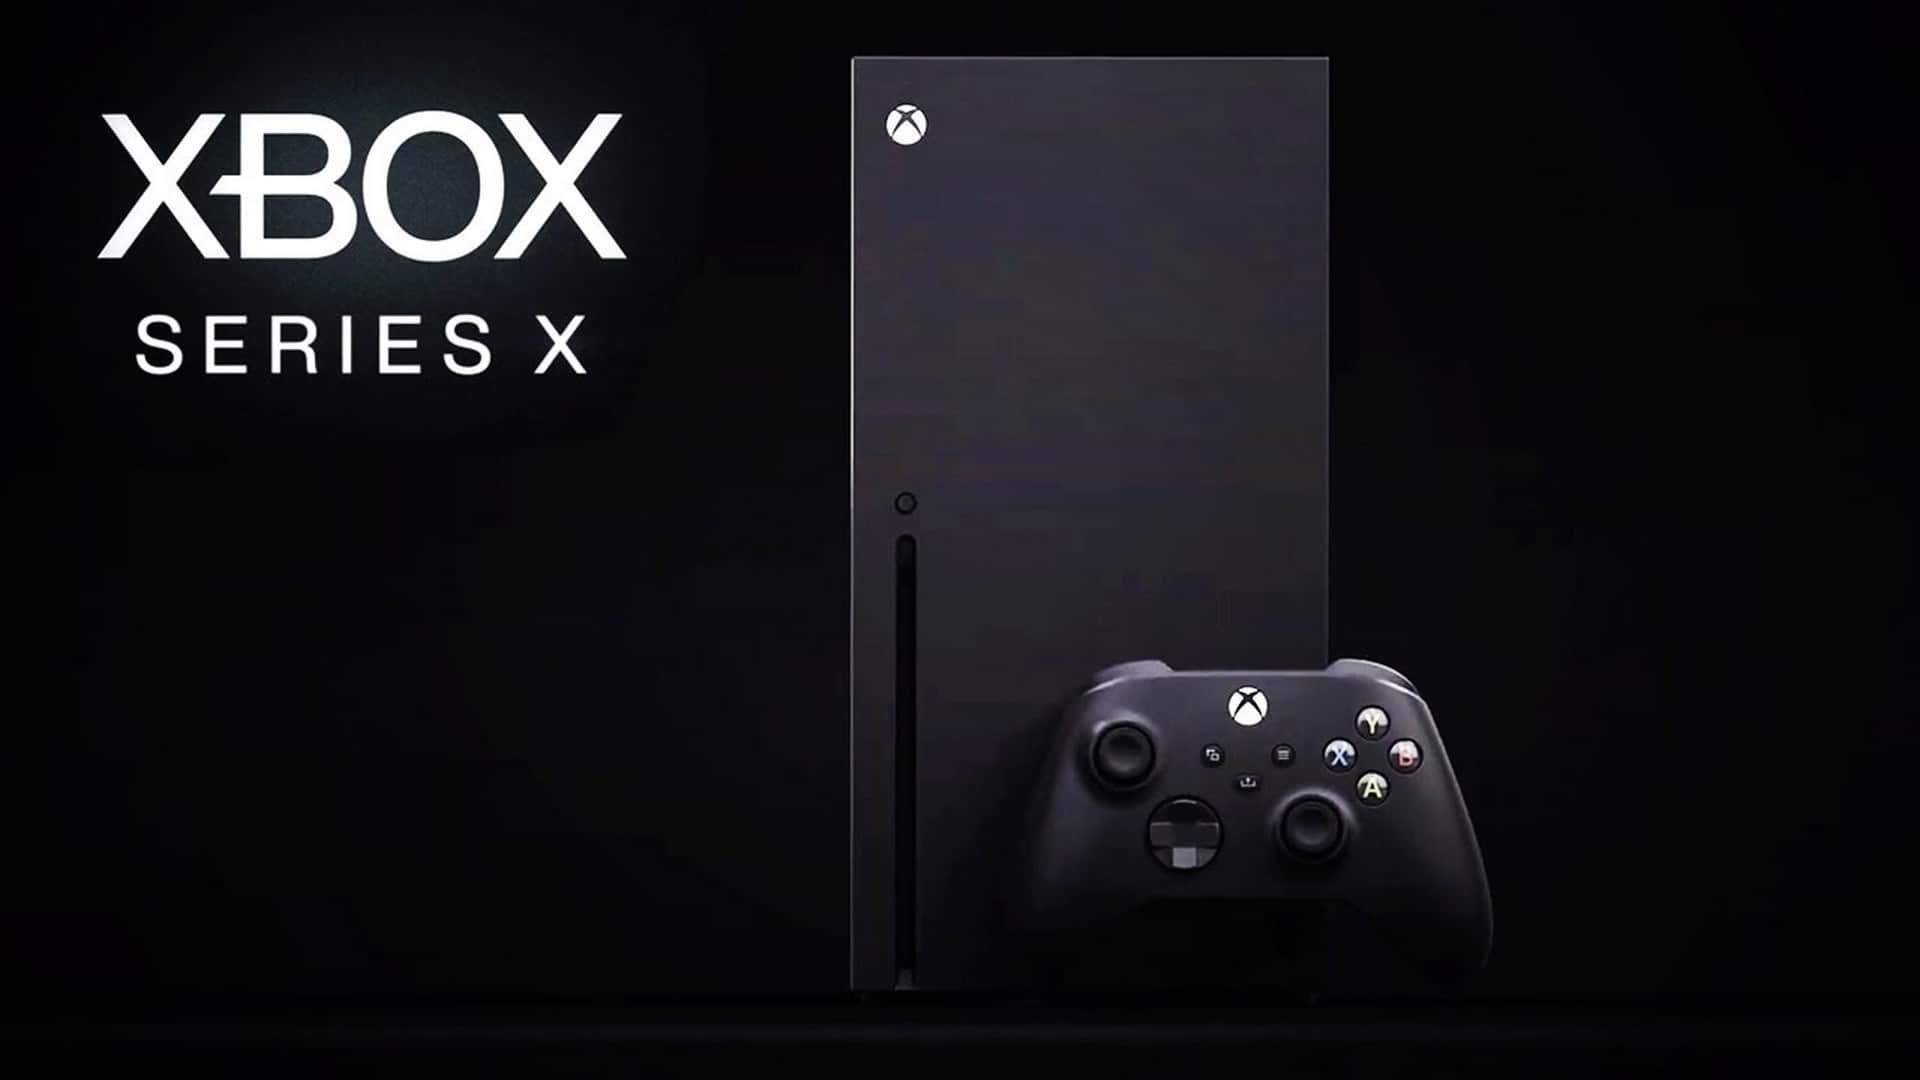 Xbox Series X - Power Your Dreams 